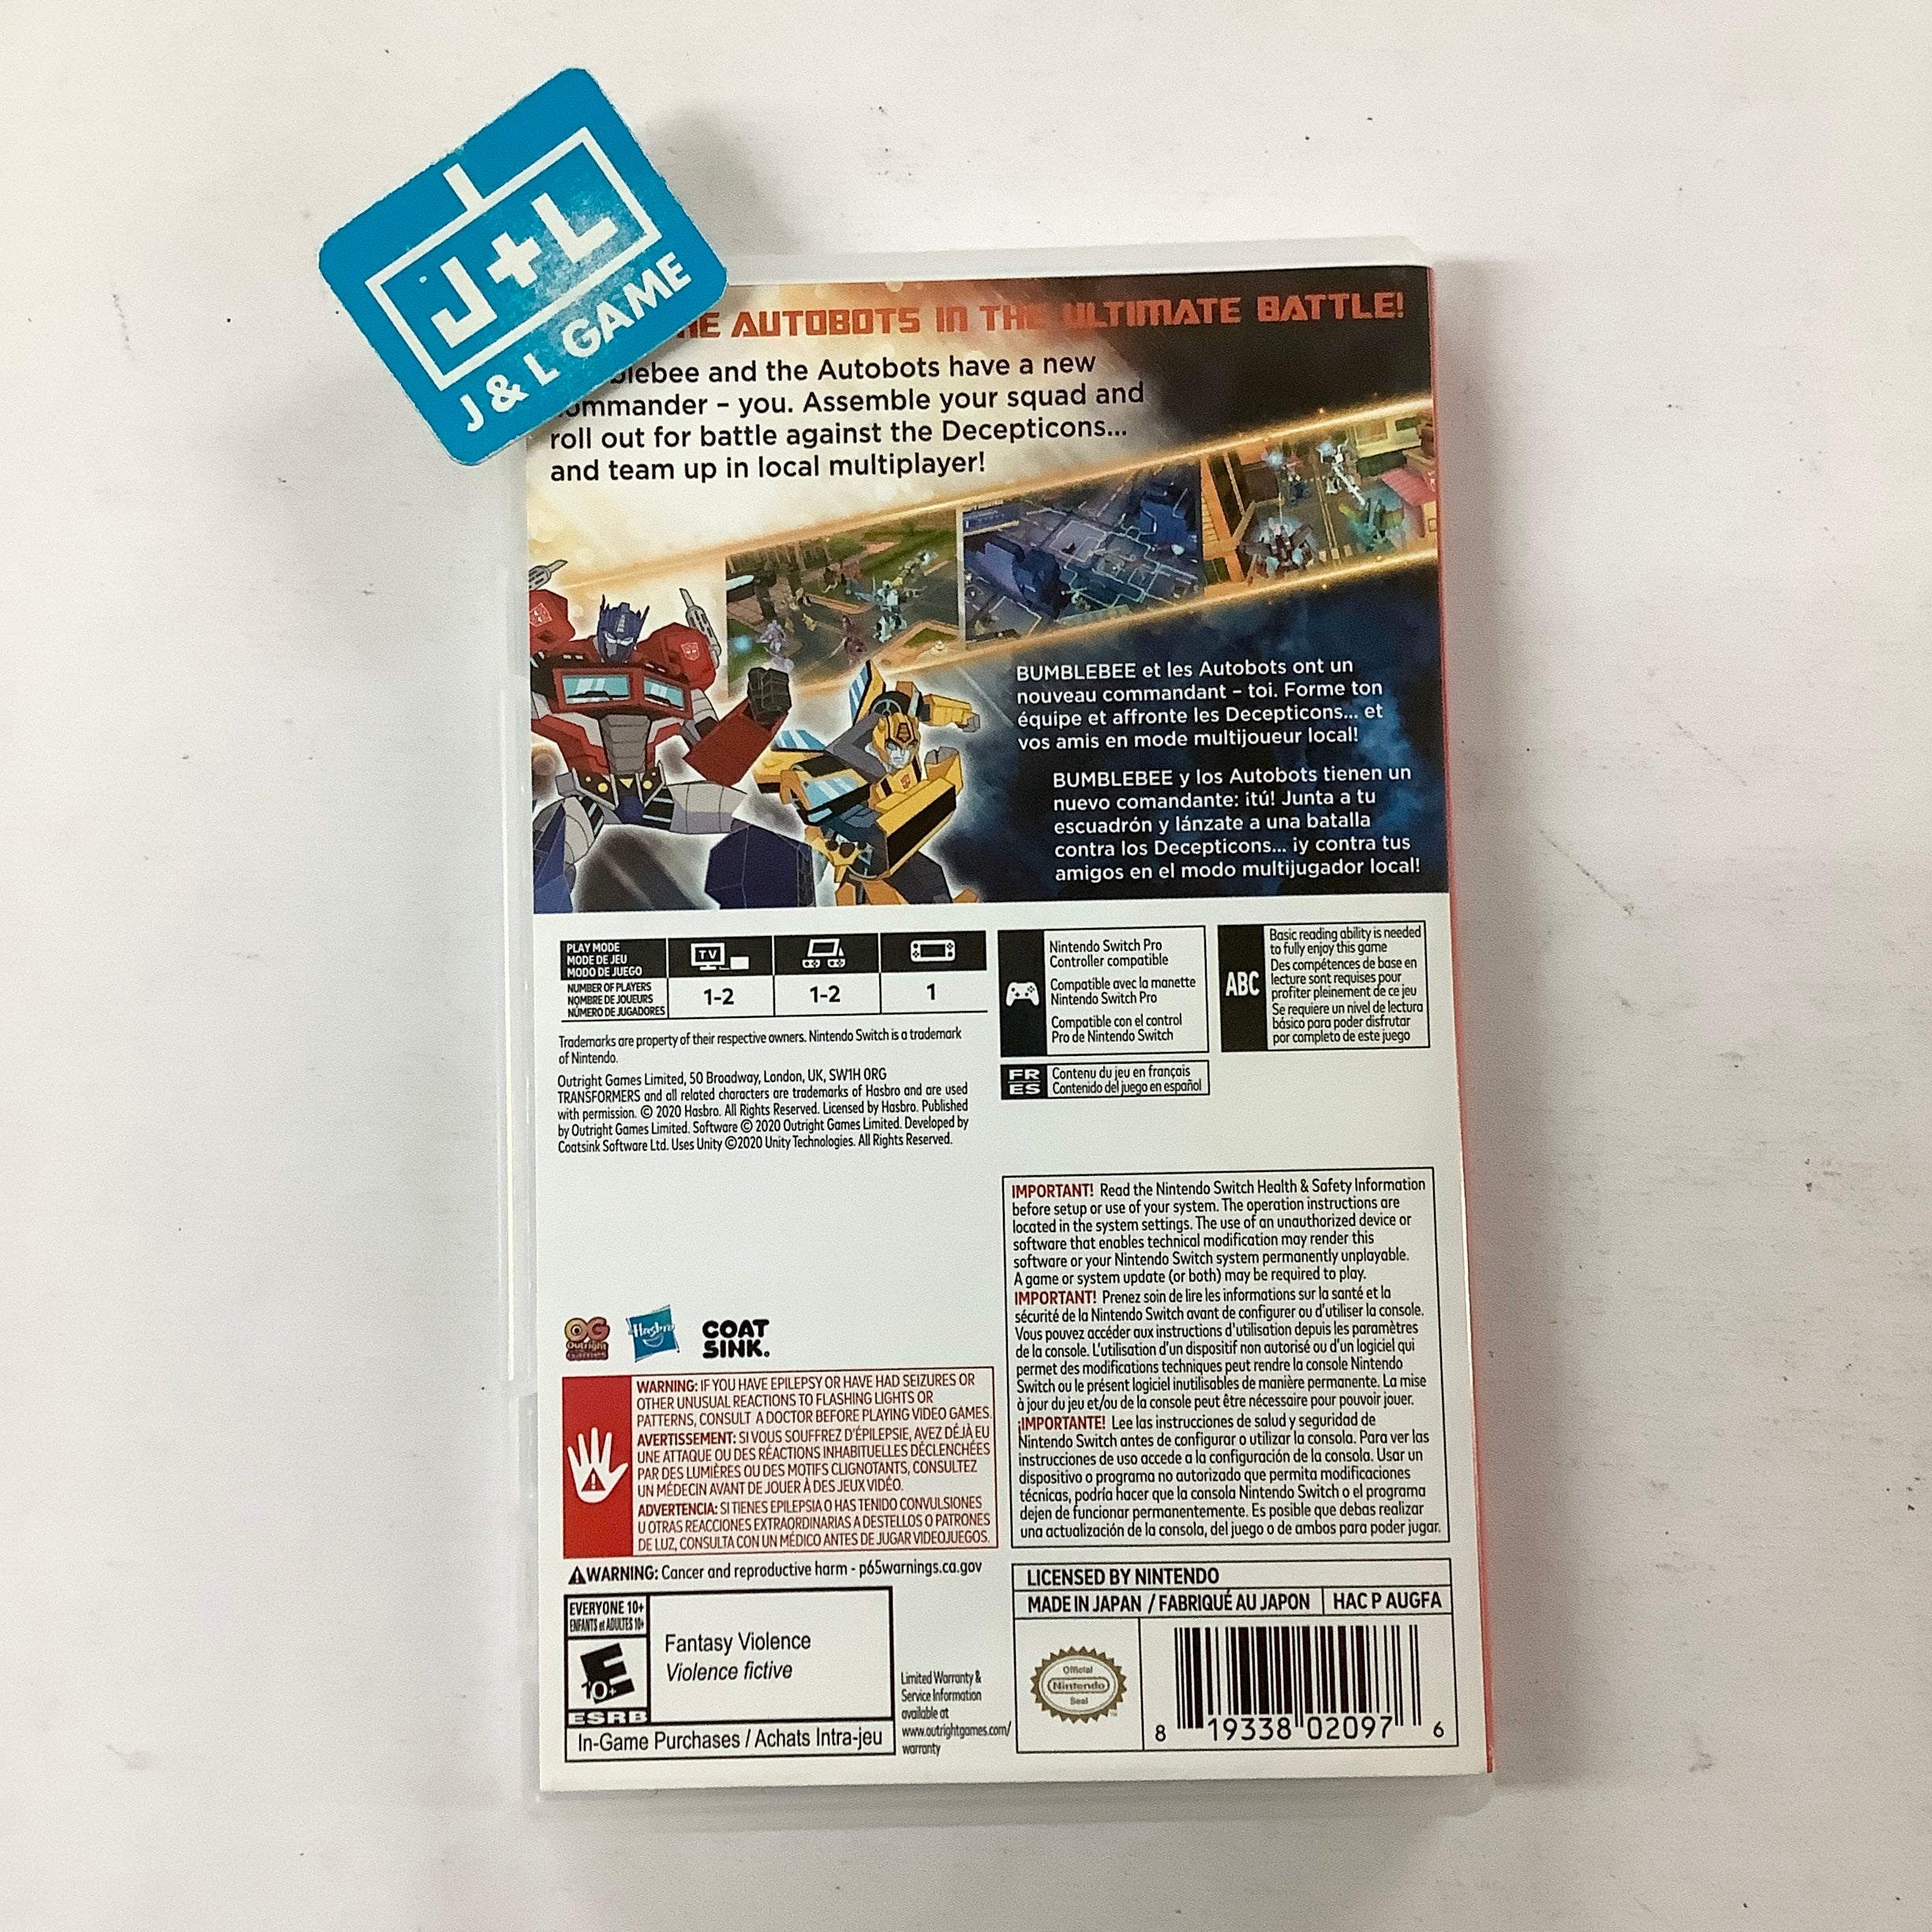 Transformers: Battlegrounds - (NSW) Nintendo Switch [Pre-Owned] Video Games Outright Games   